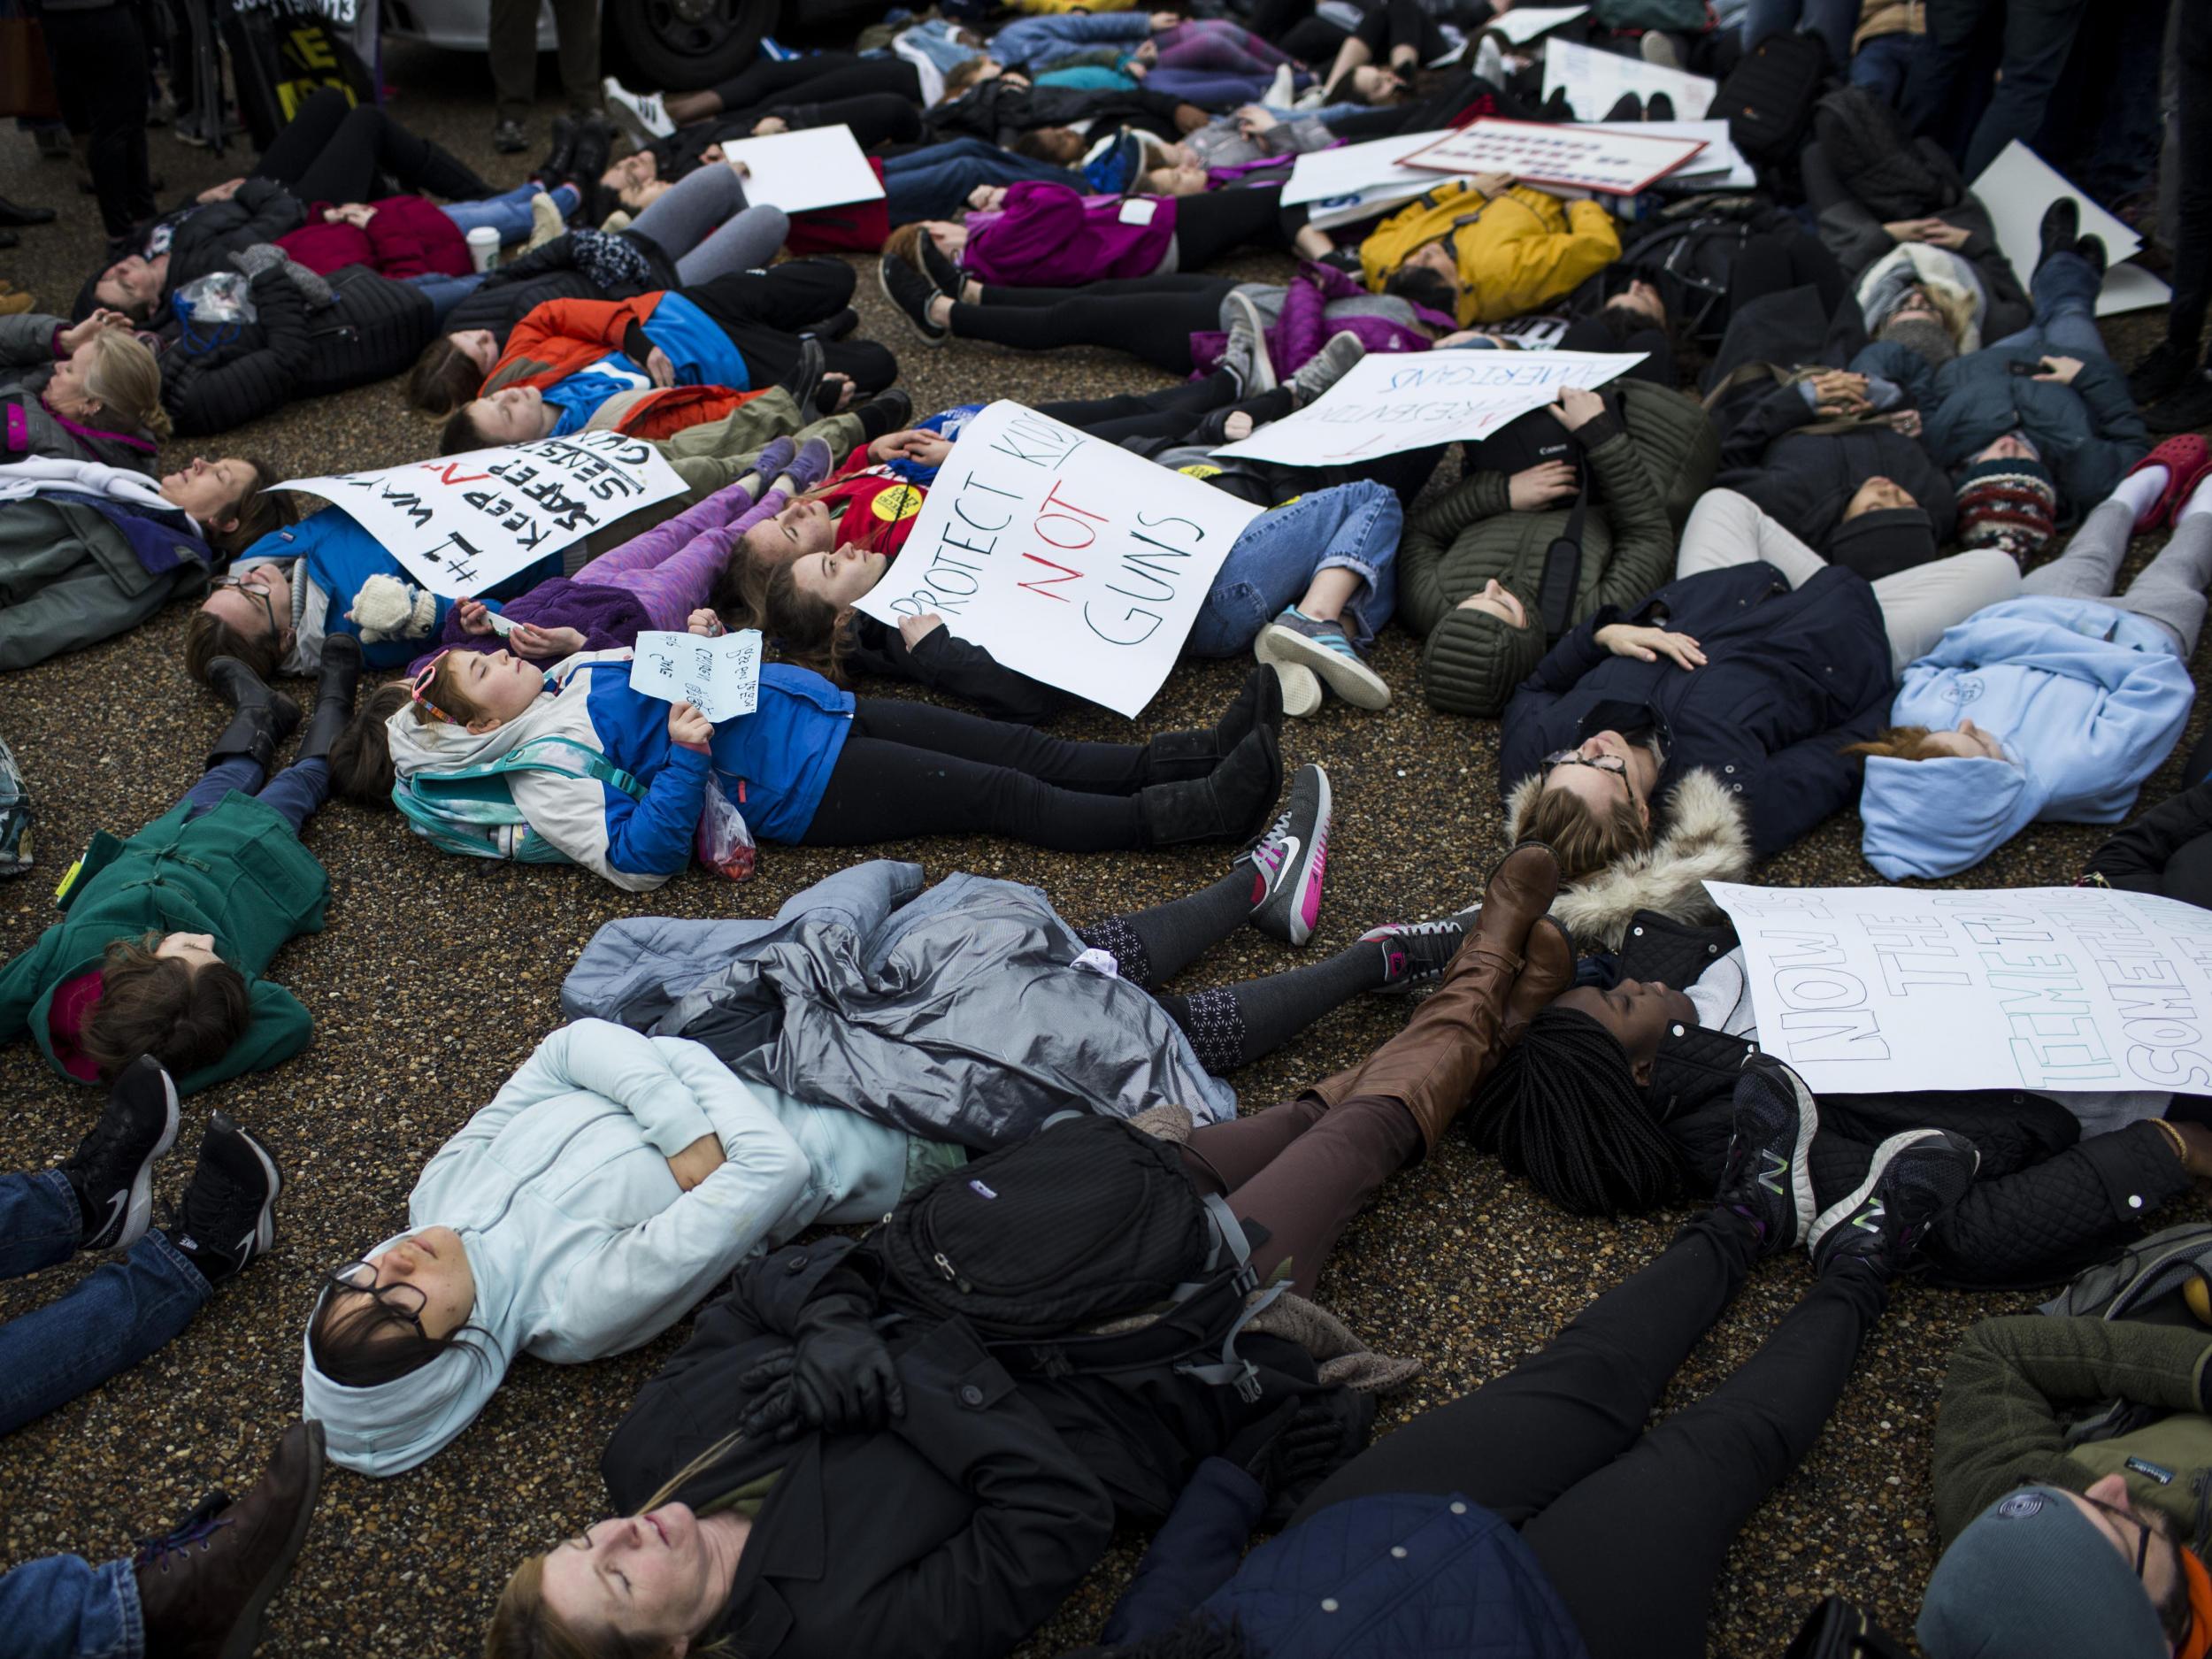 Demonstrators lie on the ground a "lie-in" protest near the White House supporting gun control reform